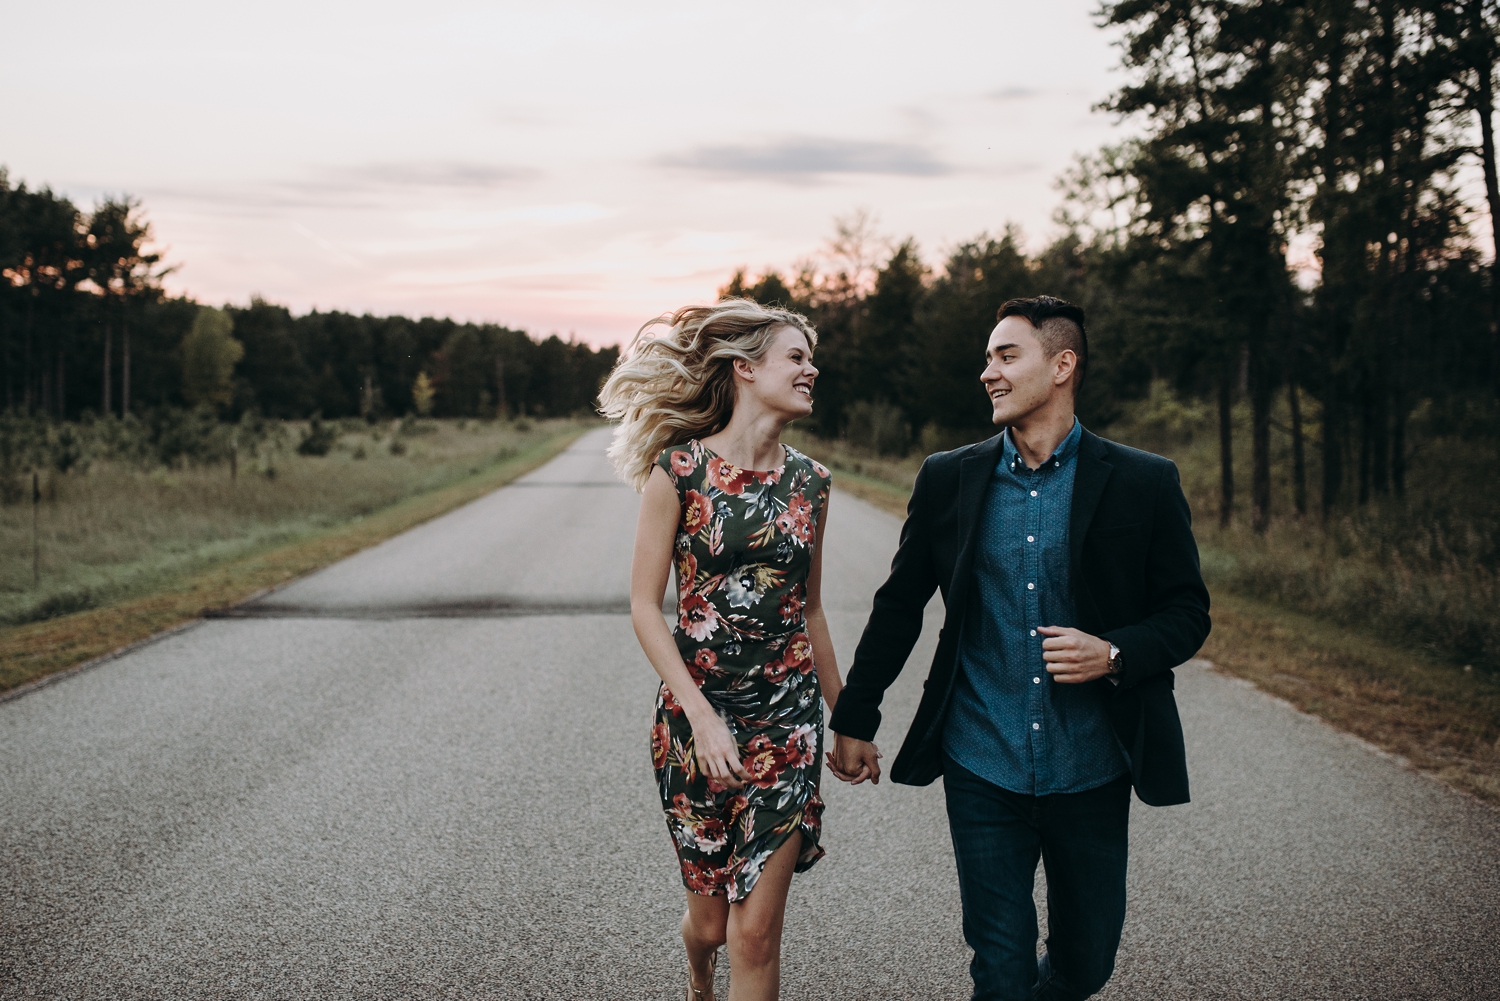 fall engagement photos in minnesota woods tom thornton photography